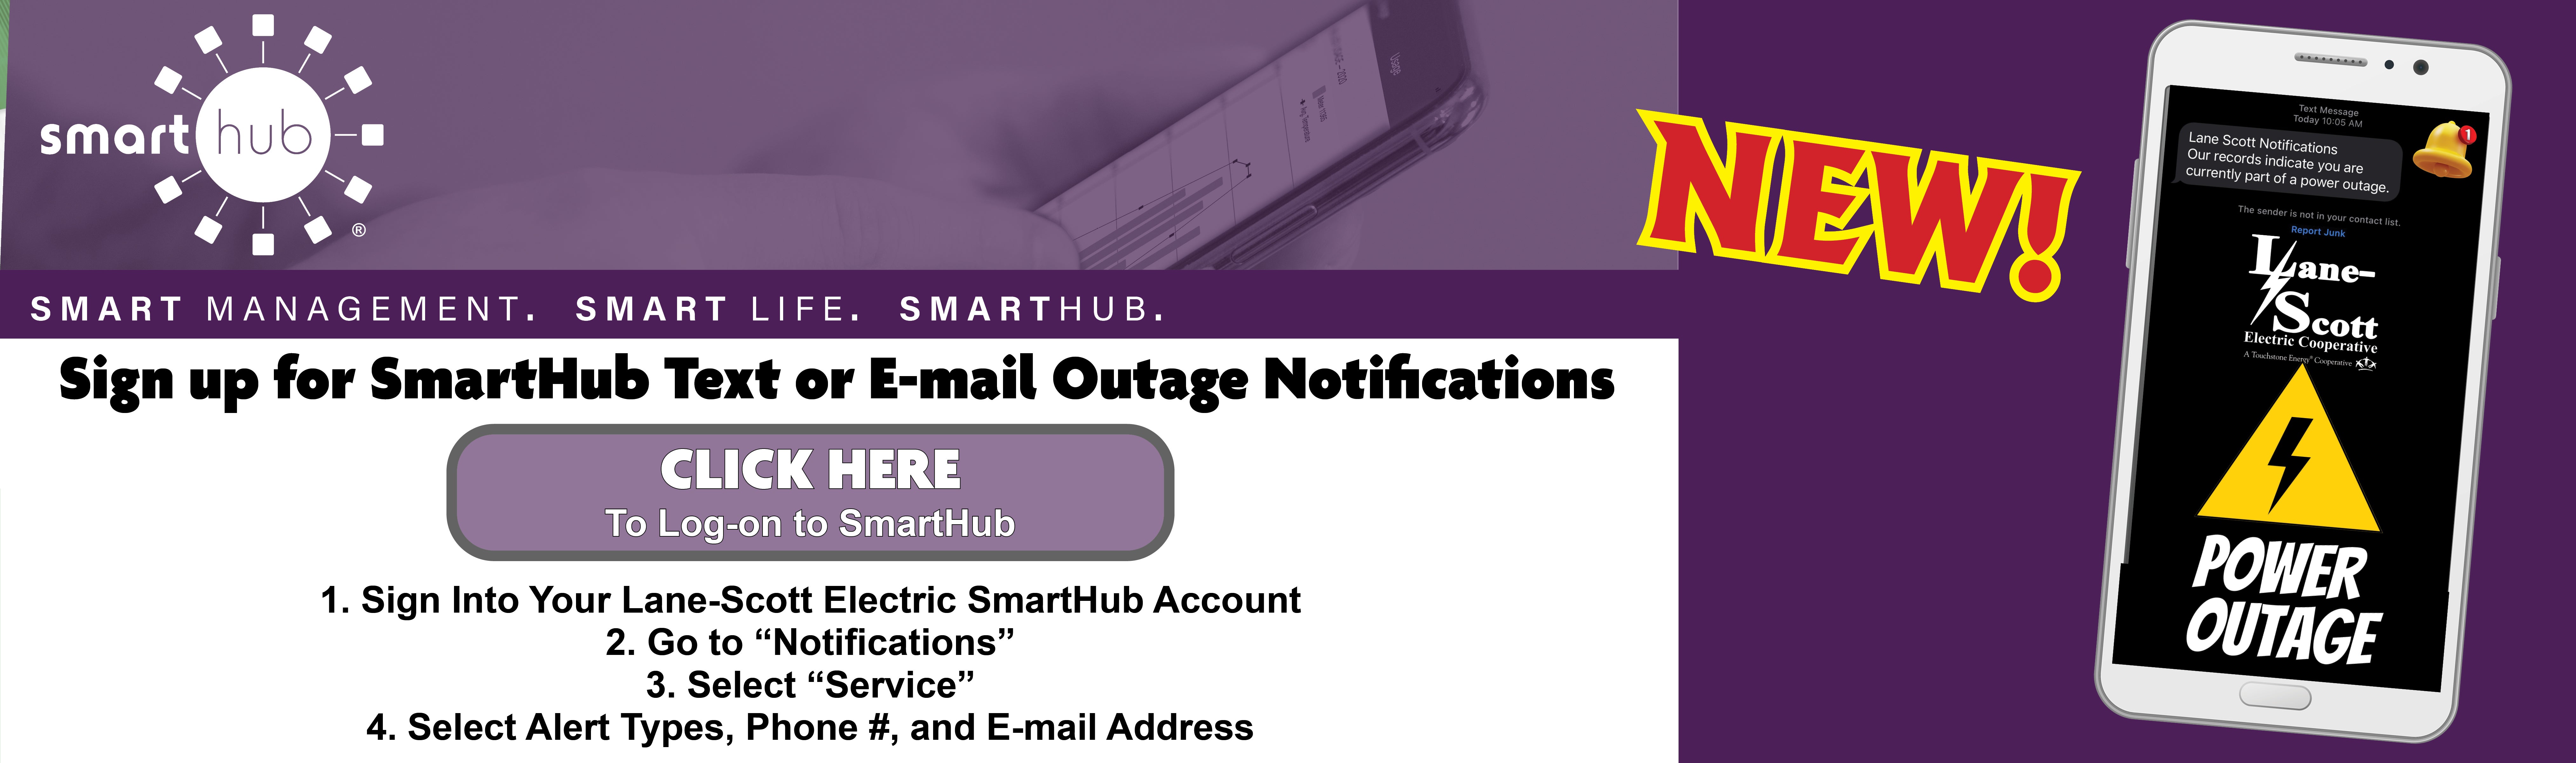 Outage Text Notifications